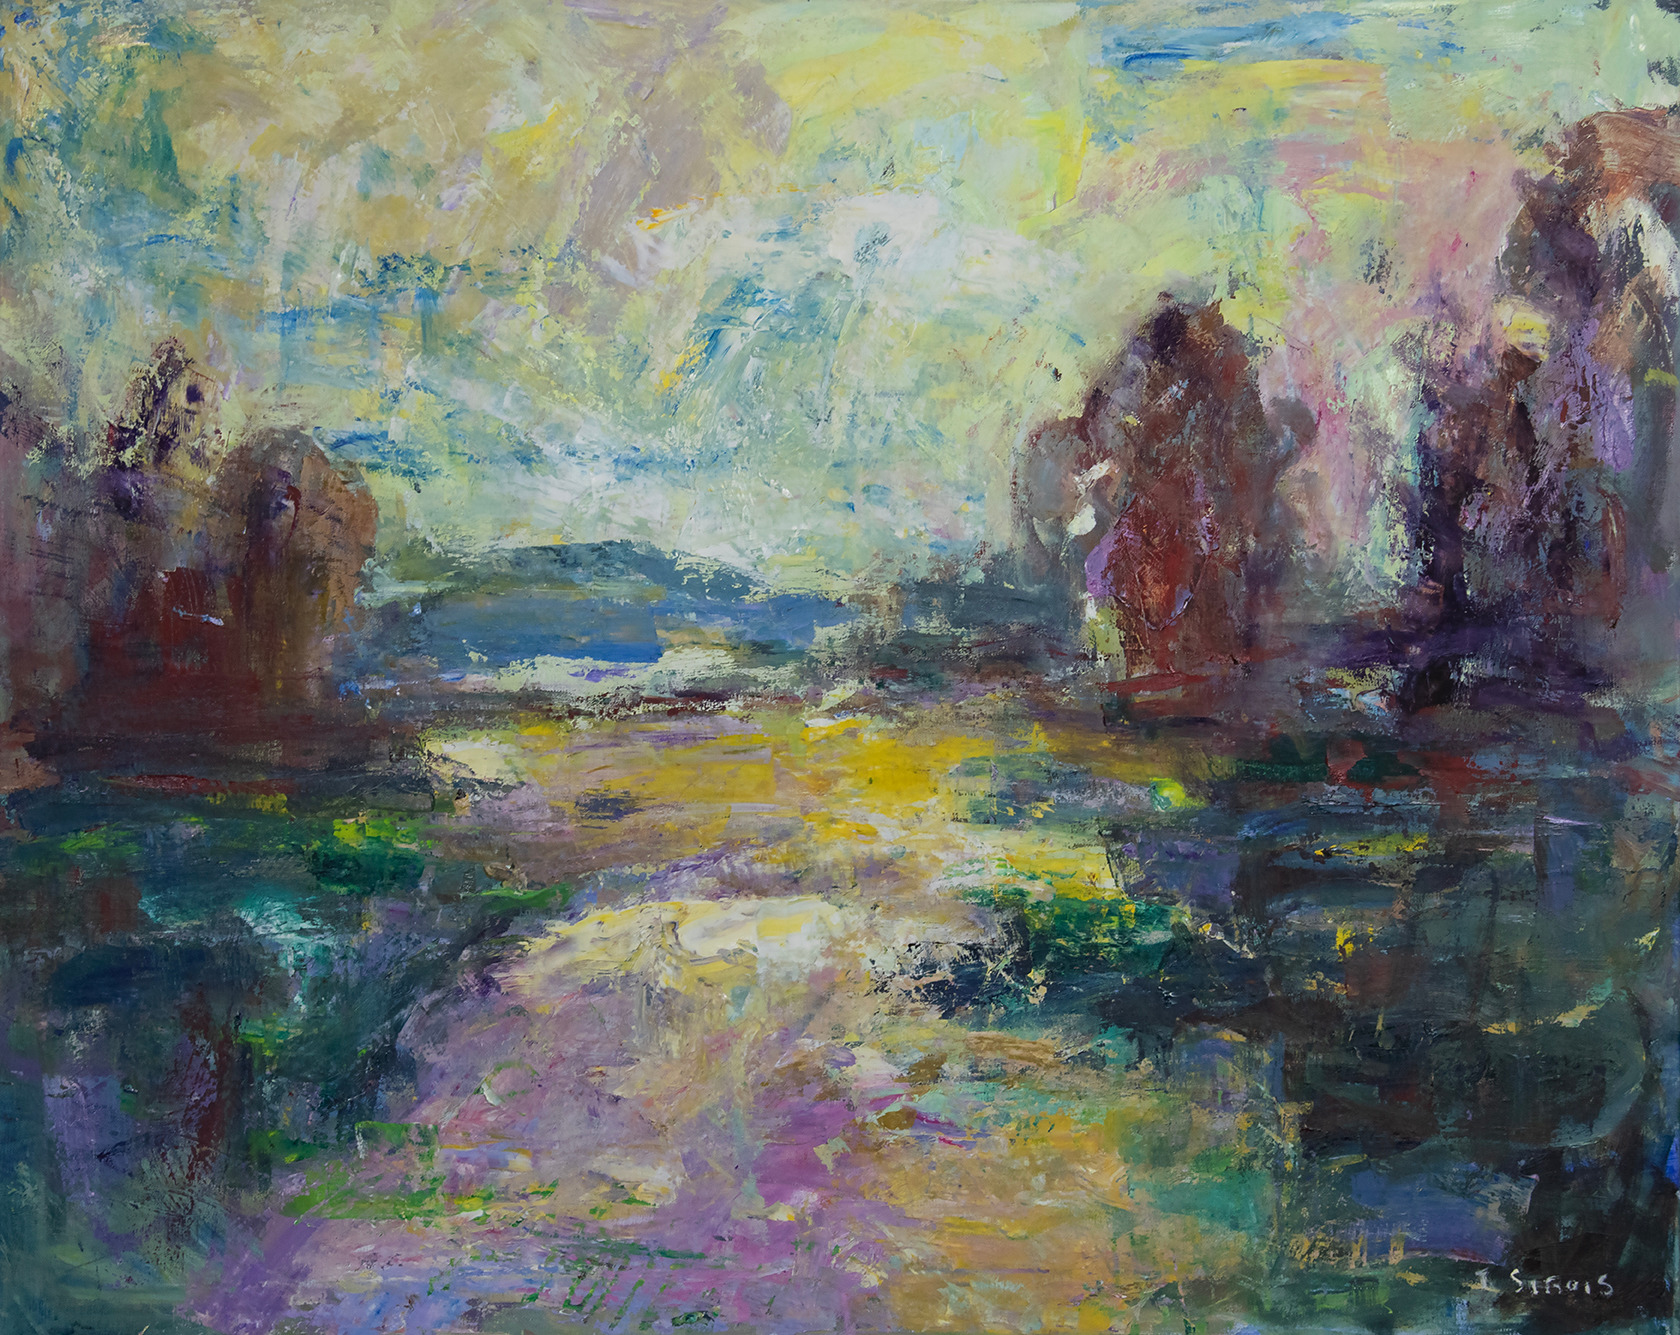  mg 2030late afternoon hurrah 30x24 oil sm 72ppi flcwlt